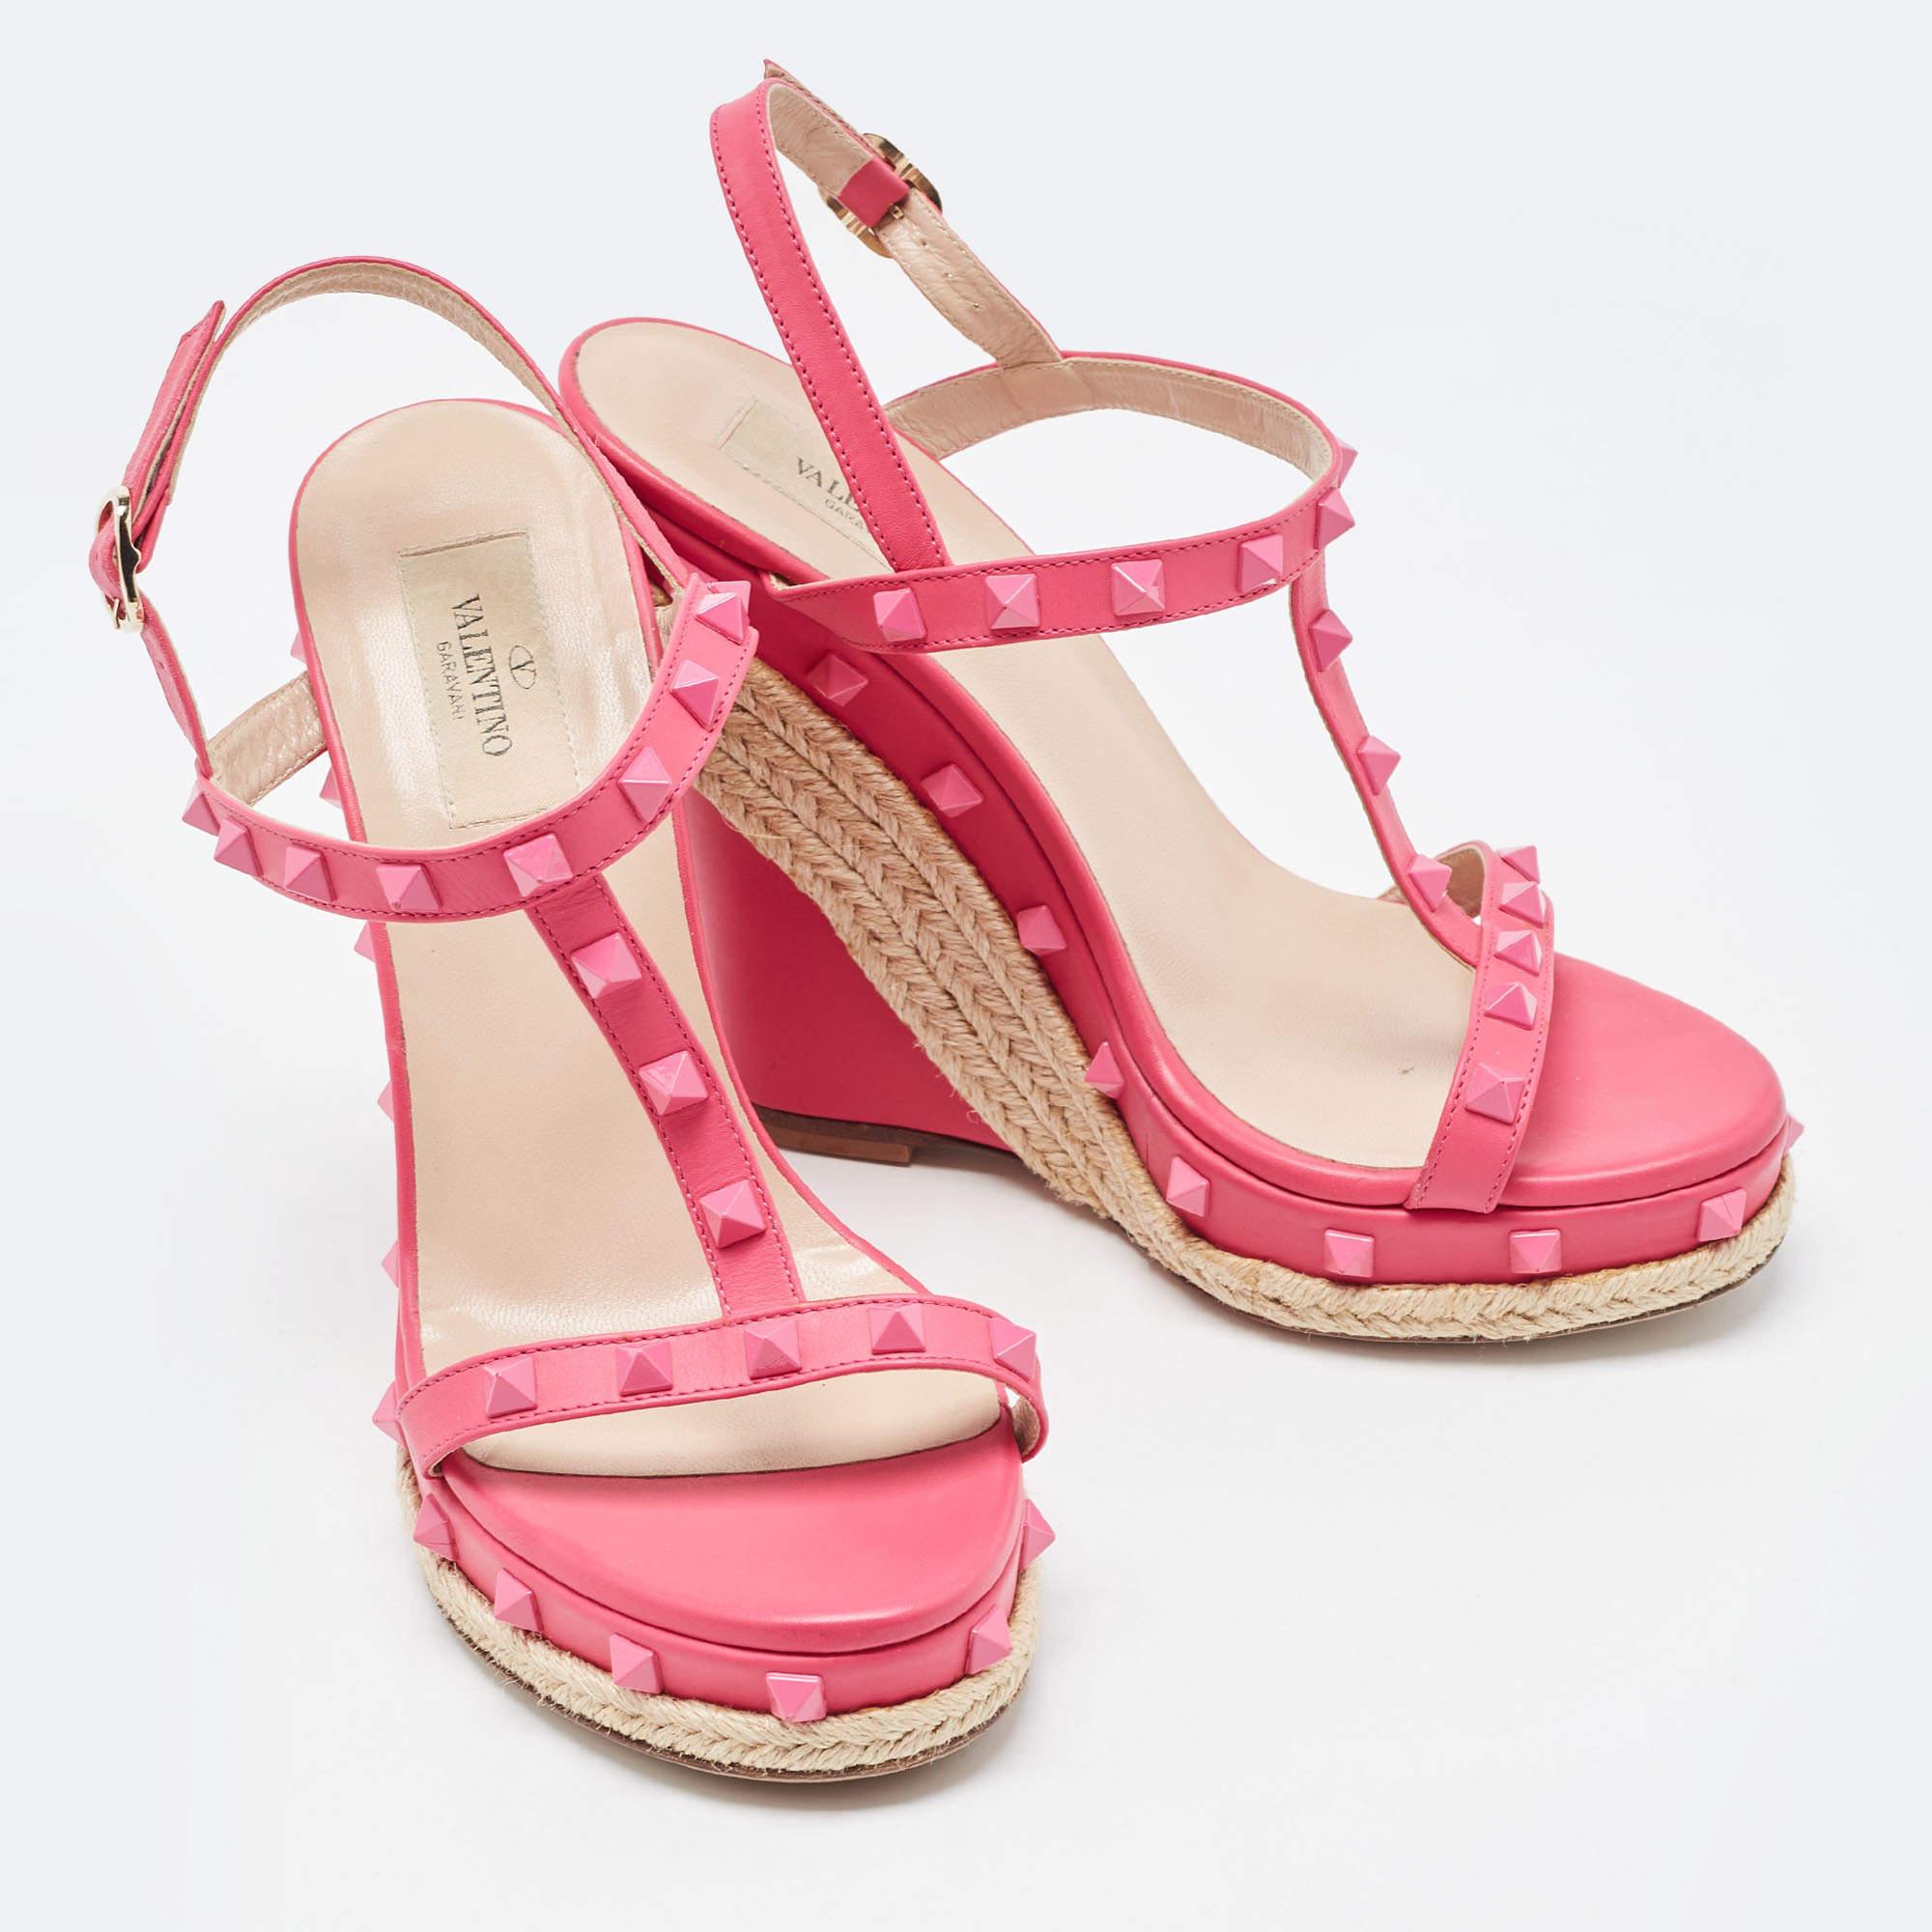 Valentino Pink Leather Rockstud Wedge Ankle Sandals Size 38.5 5